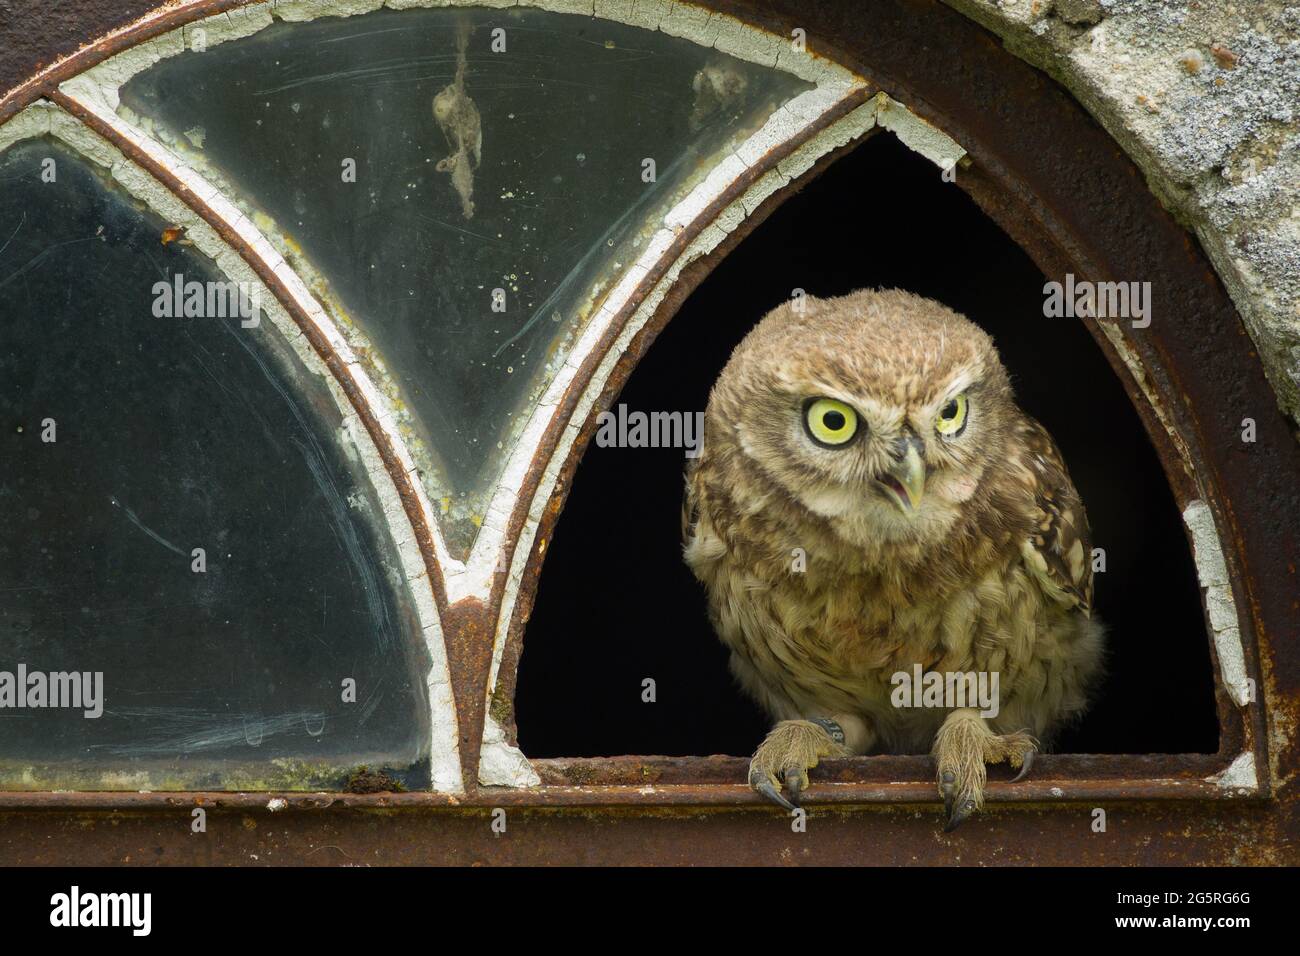 A close up of a little owl (Athene noctua) perched in the broken window of an old barn Stock Photo